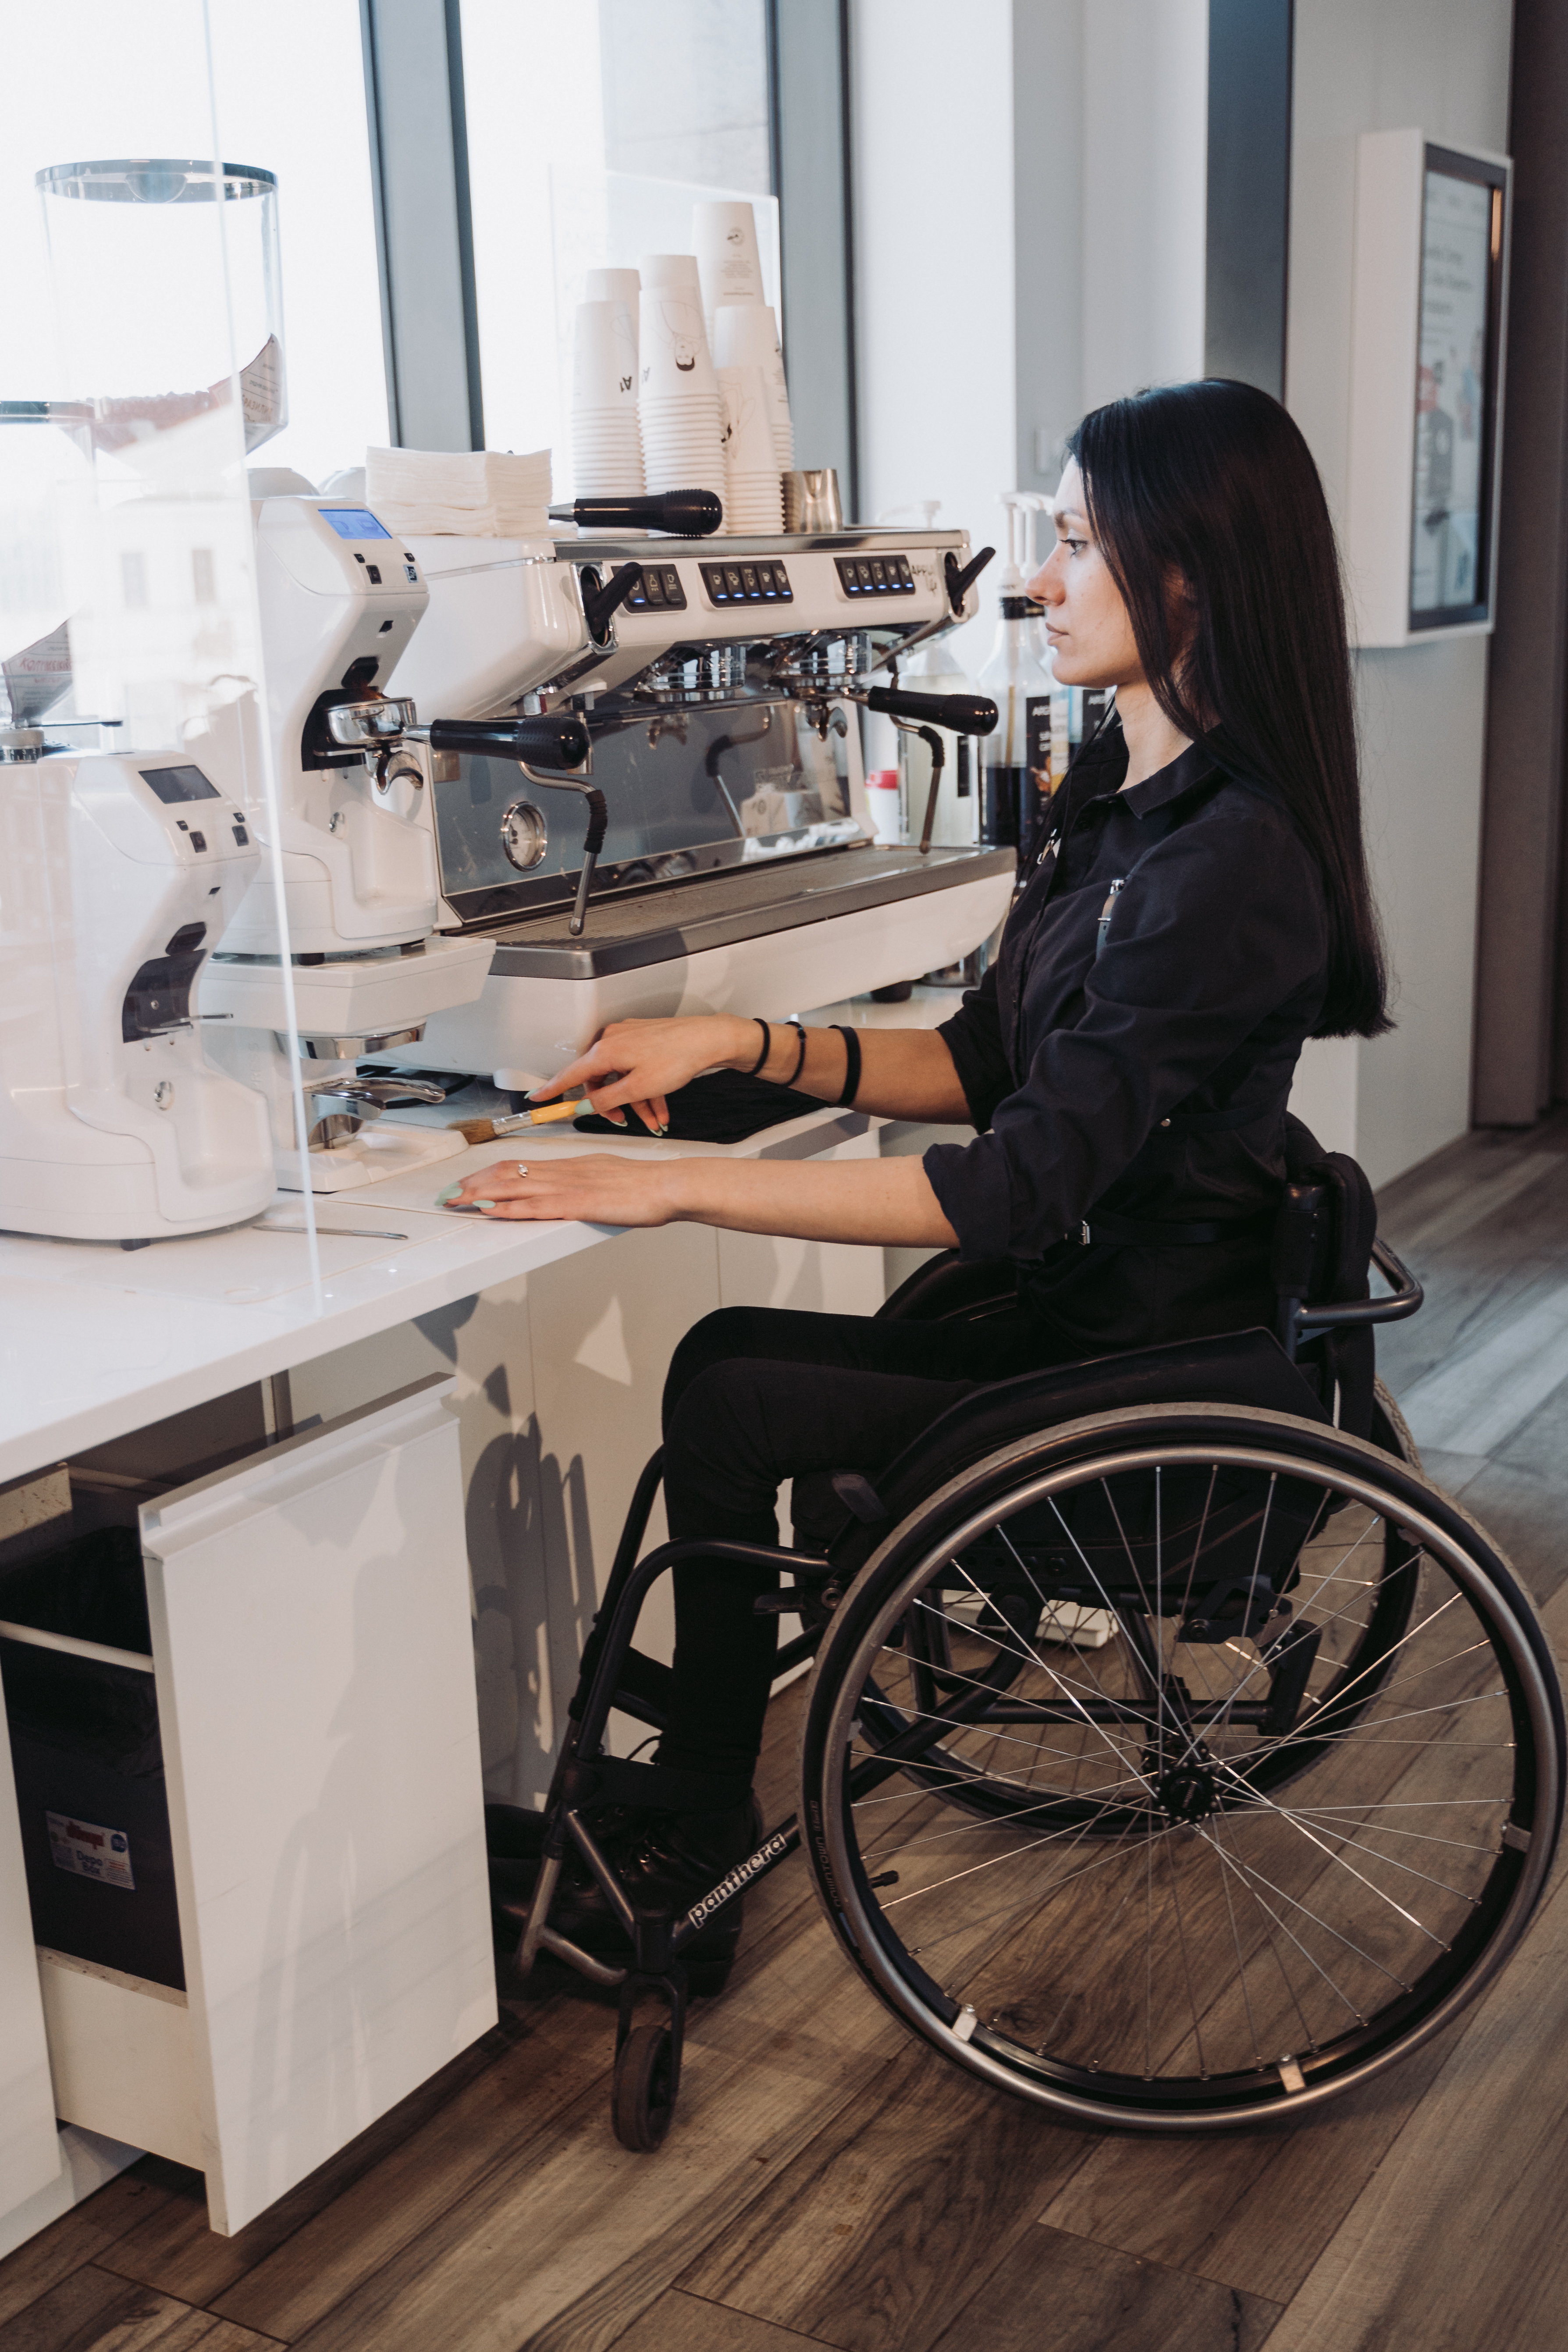 Worker in wheel chair doing work in lab